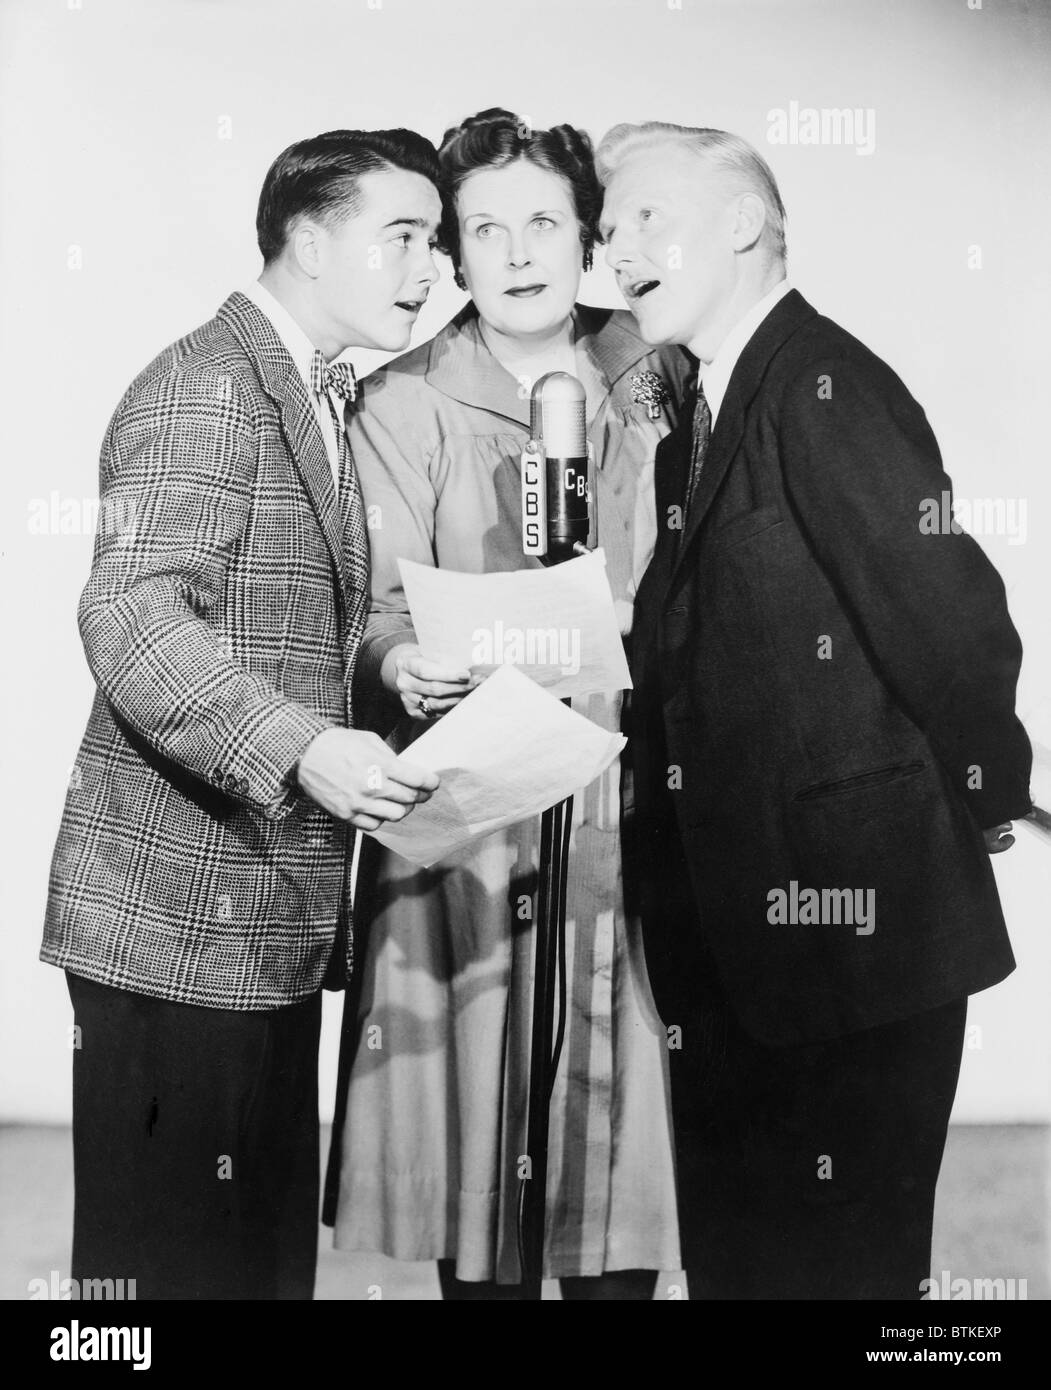 Dickie Jones (b.1927) at left, and other voice actors on the CBS radio show THE ALDRITCH FAMILY (1938-1953), a popular radio situation comedy (1939-1953). Jones was earlier cast as a child actor with Humphrey Bogart in BLACK LEGION, 1937. In the 1950s he would star in TV western series, BUFFALO BILL, JR. Stock Photo